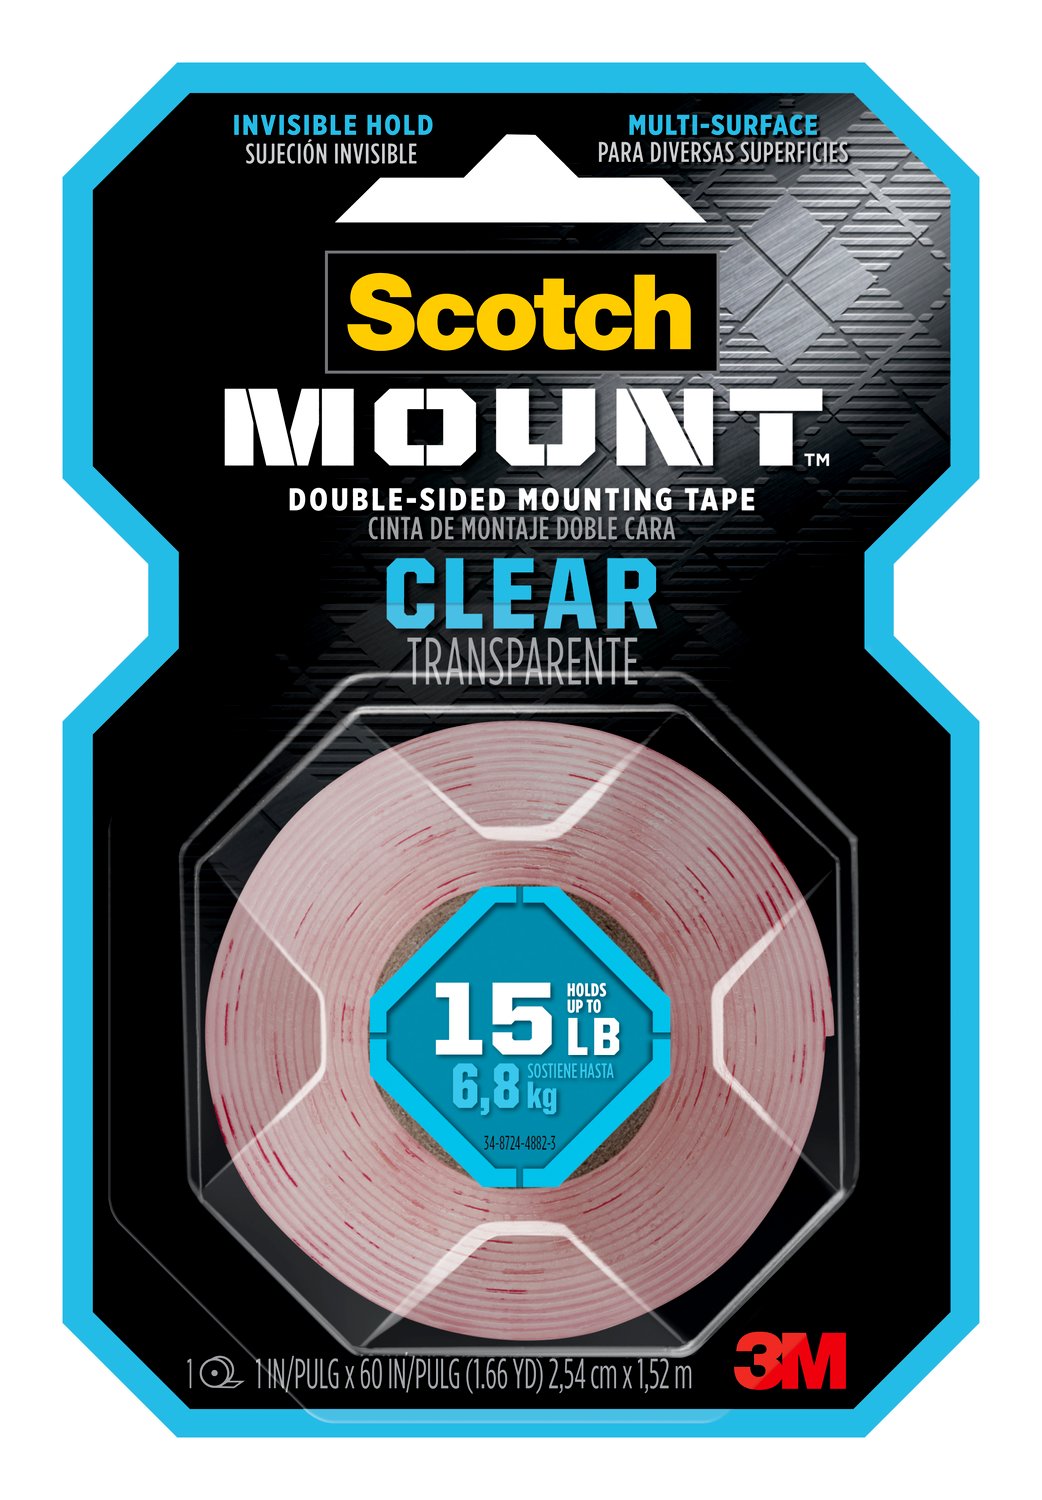 7100235241 - Scotch-Mount Clear Double-Sided Mounting Tape 410H, 1 in x 60 in (2.54 cm x 1.52 m)